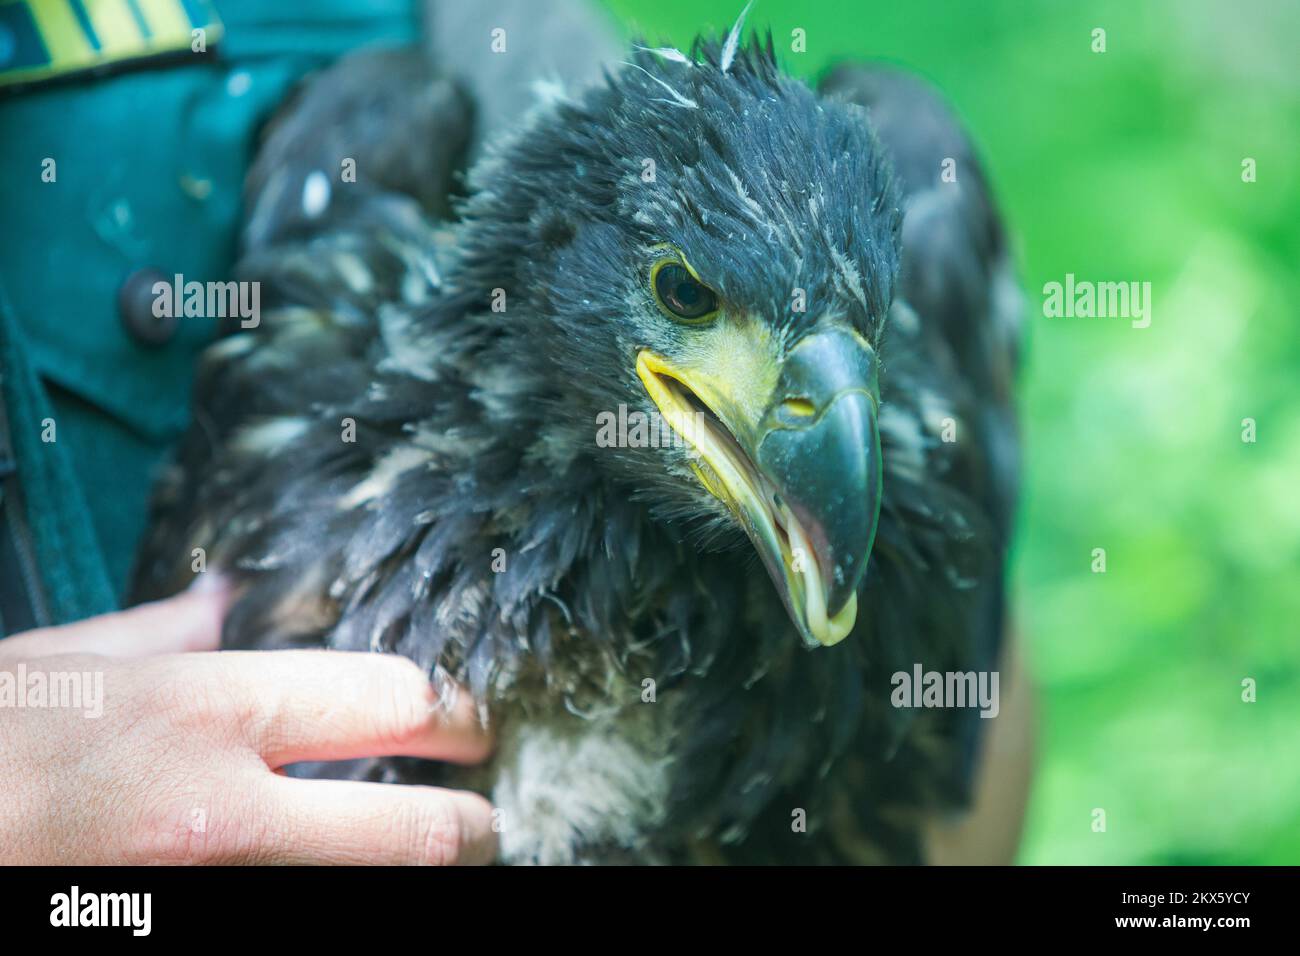 25.04.2018., Croatia, Kopacki rit - For the purpose of monitoring eagles, ringing of white-tailed eagles in cooperation with the National Park Danube-Drava from Hungary and the Croatian Society for the Protection of nature and birds. The mountaineer, who climbs up to high-pitched tree nests, also comes from Hungary. Photo: Davor Javorovic/PIXSELL Stock Photo